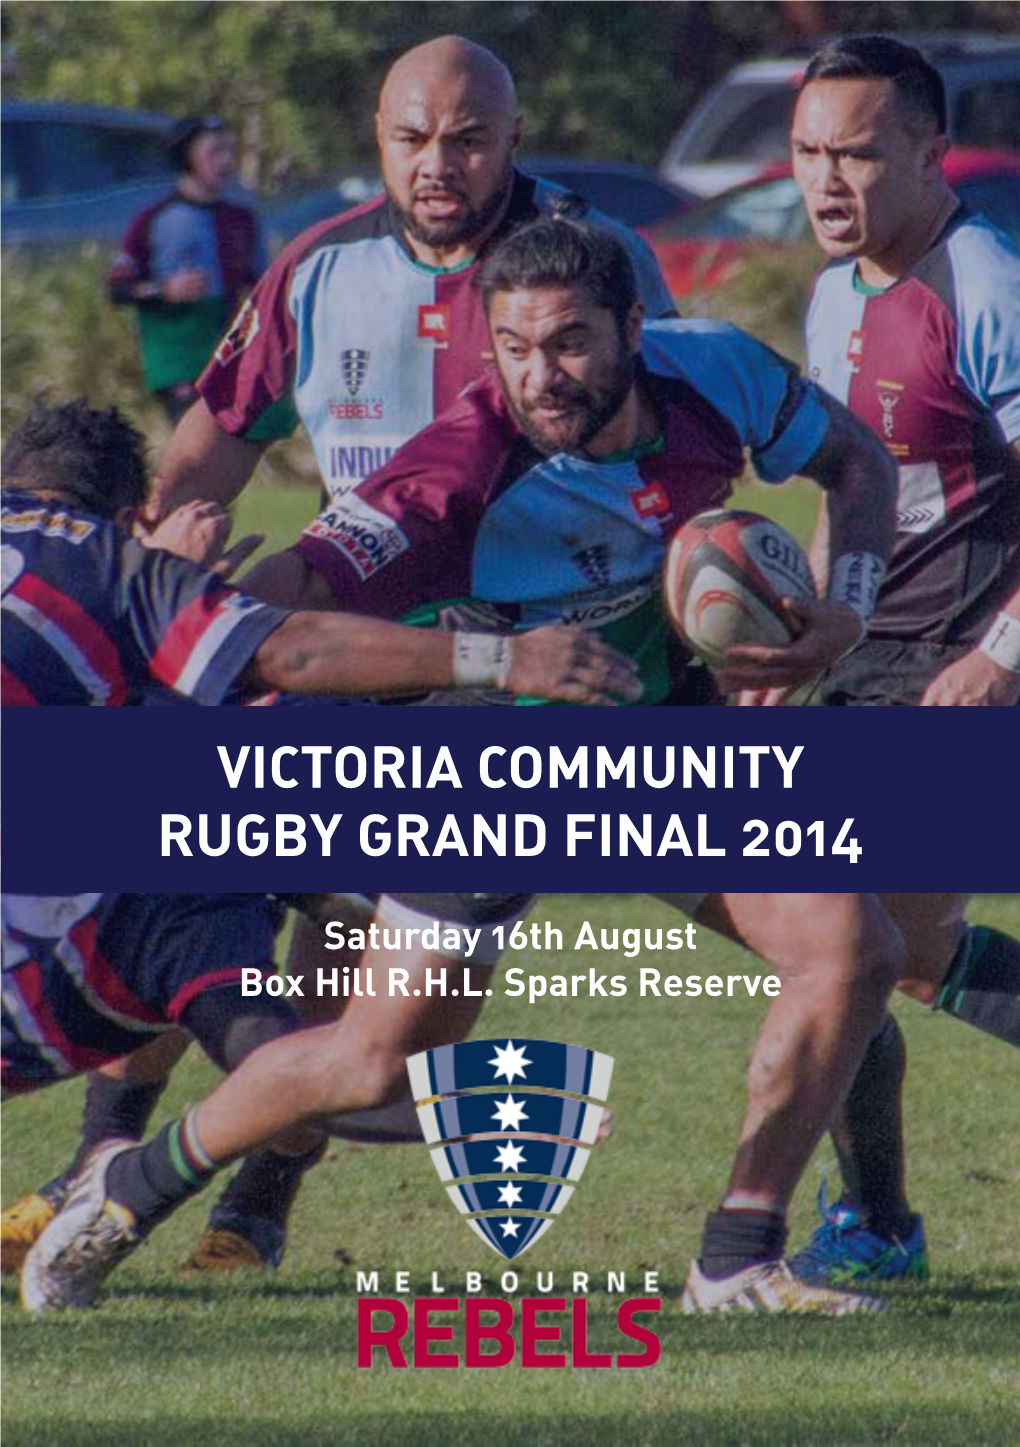 Victoria Community Rugby Grand Final 2014